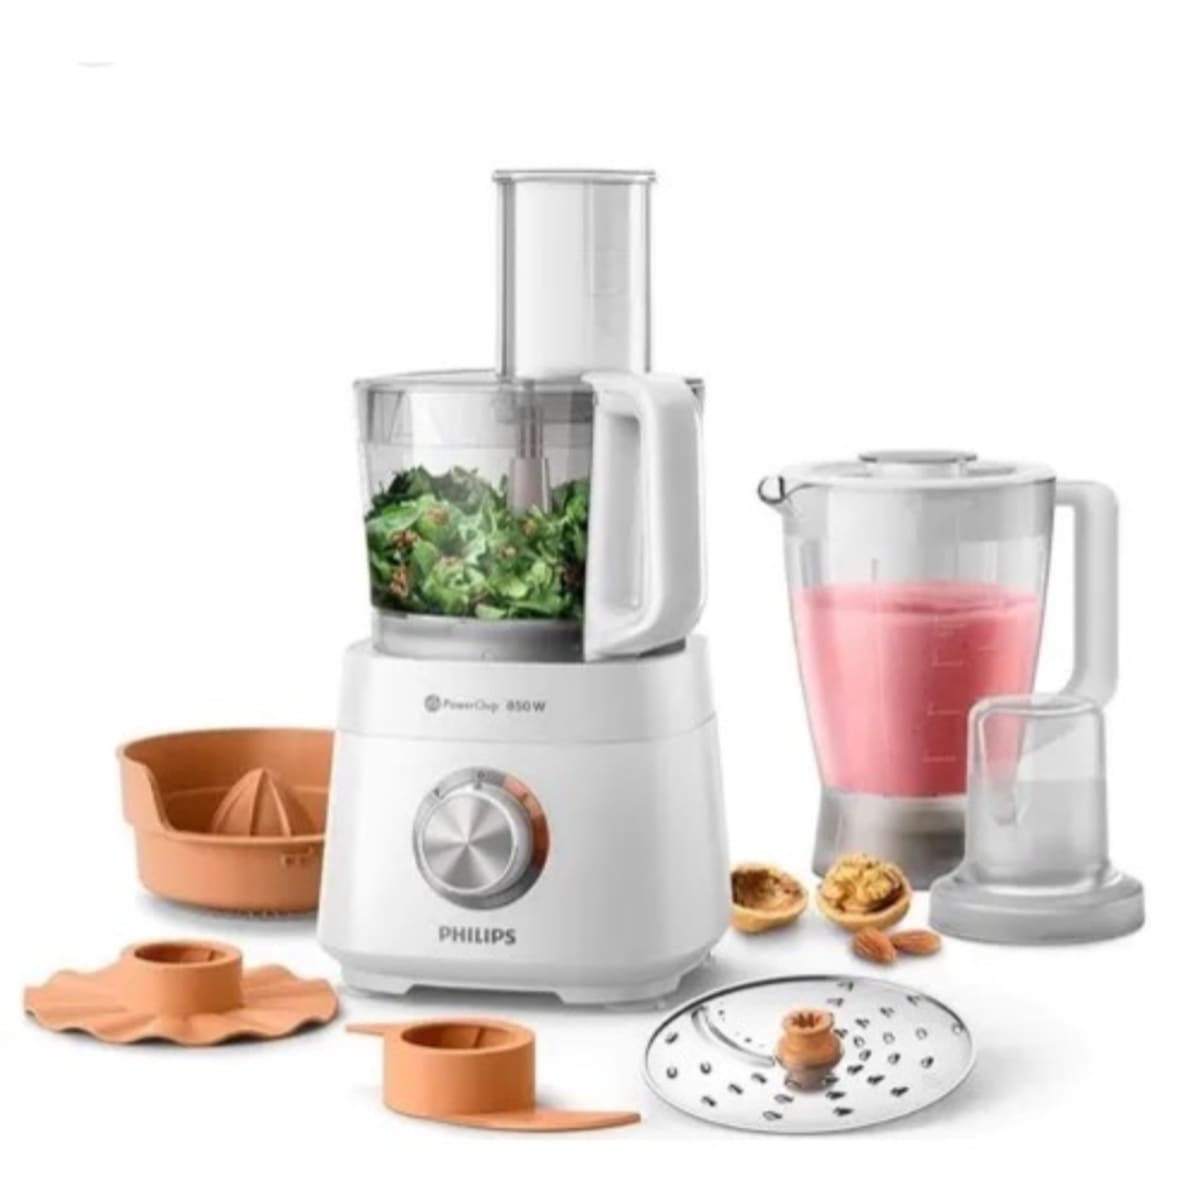 spot Mule passionate Philips Viva Collection Compact Food Processor - 800W HR7520-01 - White -  1L | Konga Online Shopping